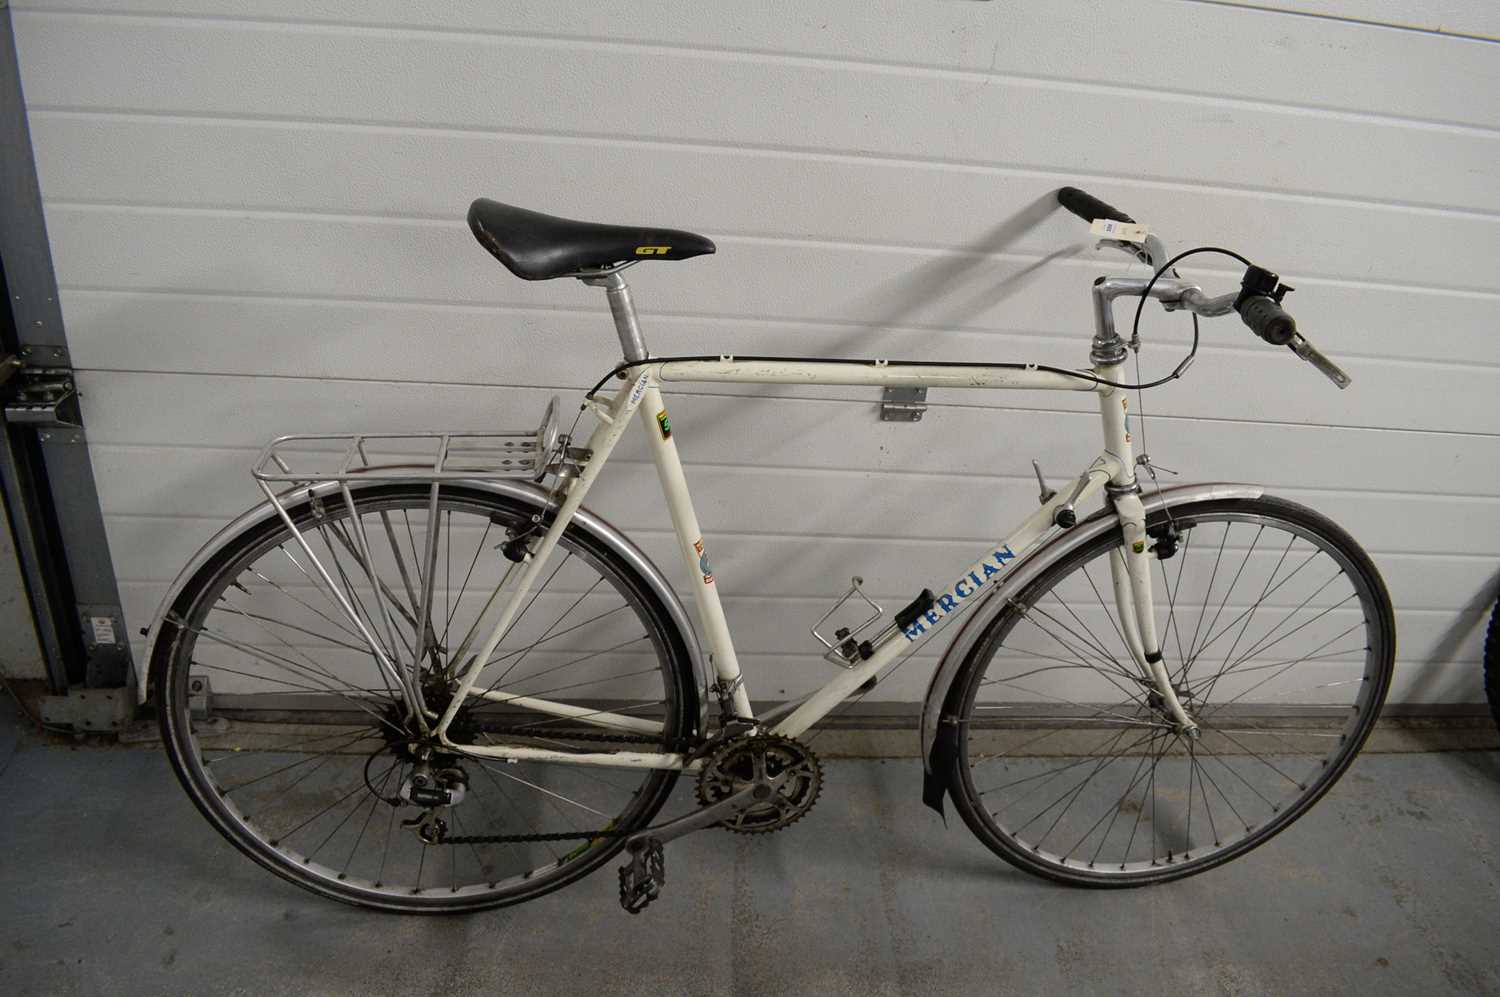 A flat-bar steel-framed bicycle by Mercian Cycles, Derby.